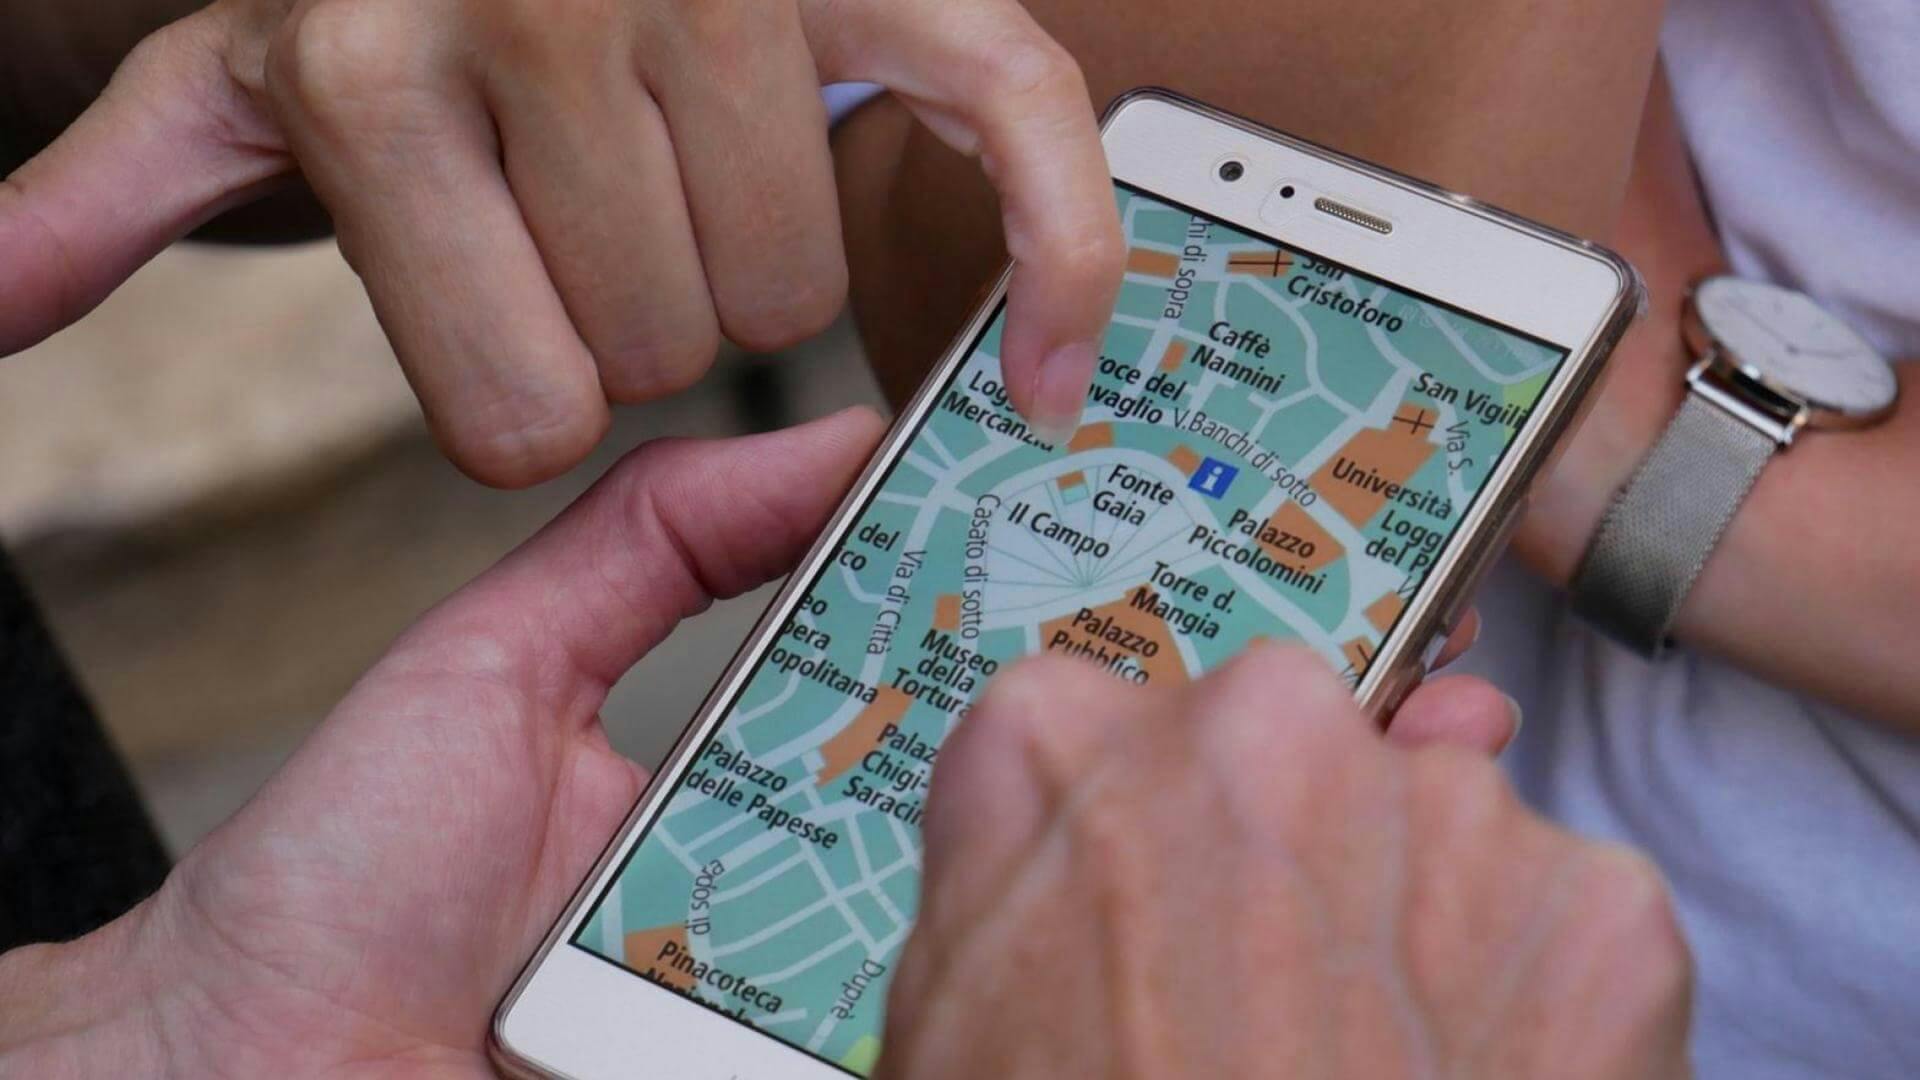 choosing coworking space location on smartphone Google maps